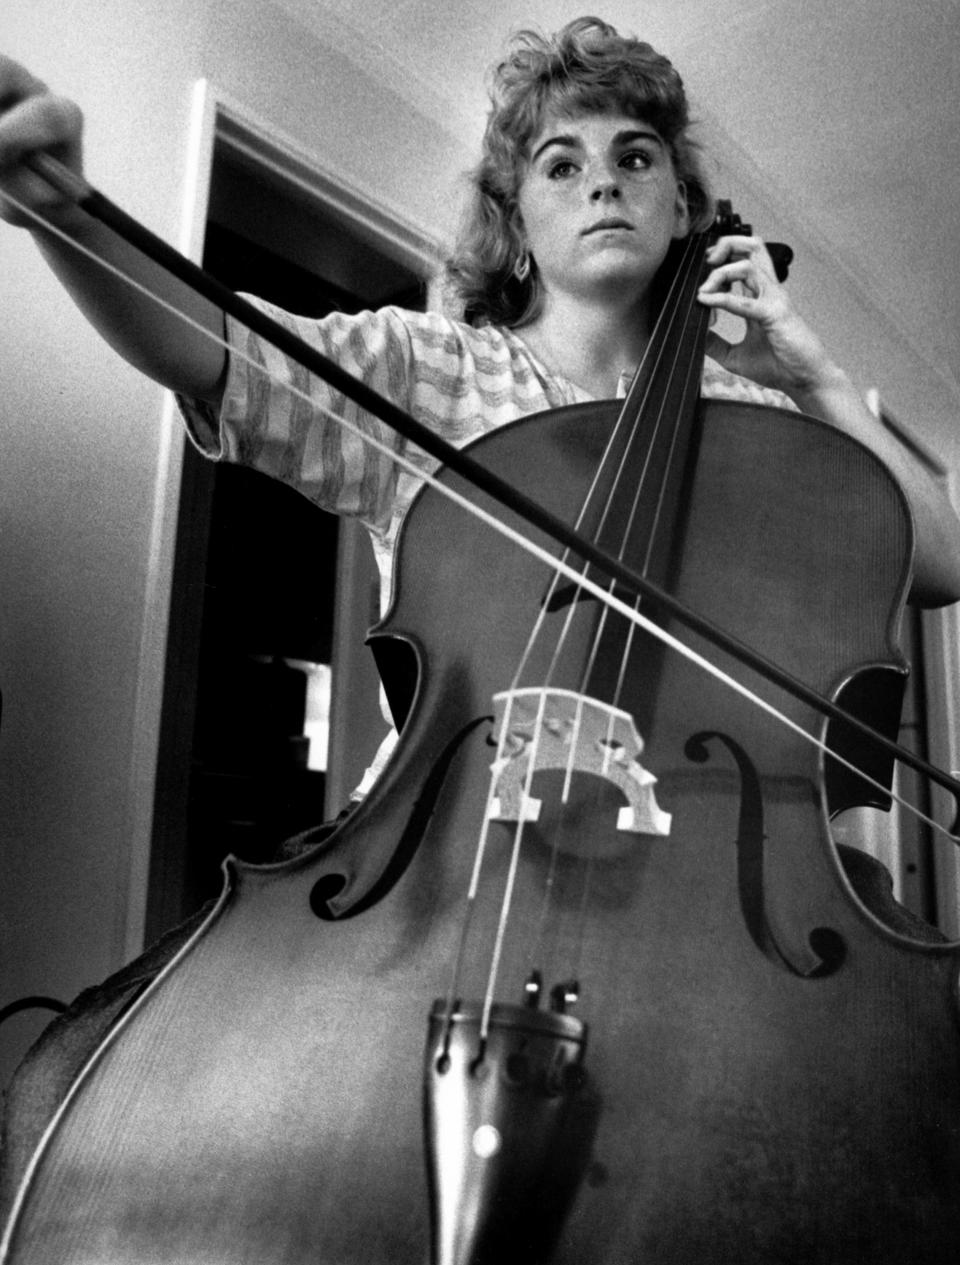 Jennifer Bonner practices cello at LAMP on the Lanier High School campus in 1987. The magnet program would later move out of Lanier and into the Loveless School building, which had previously housed an elementary school.